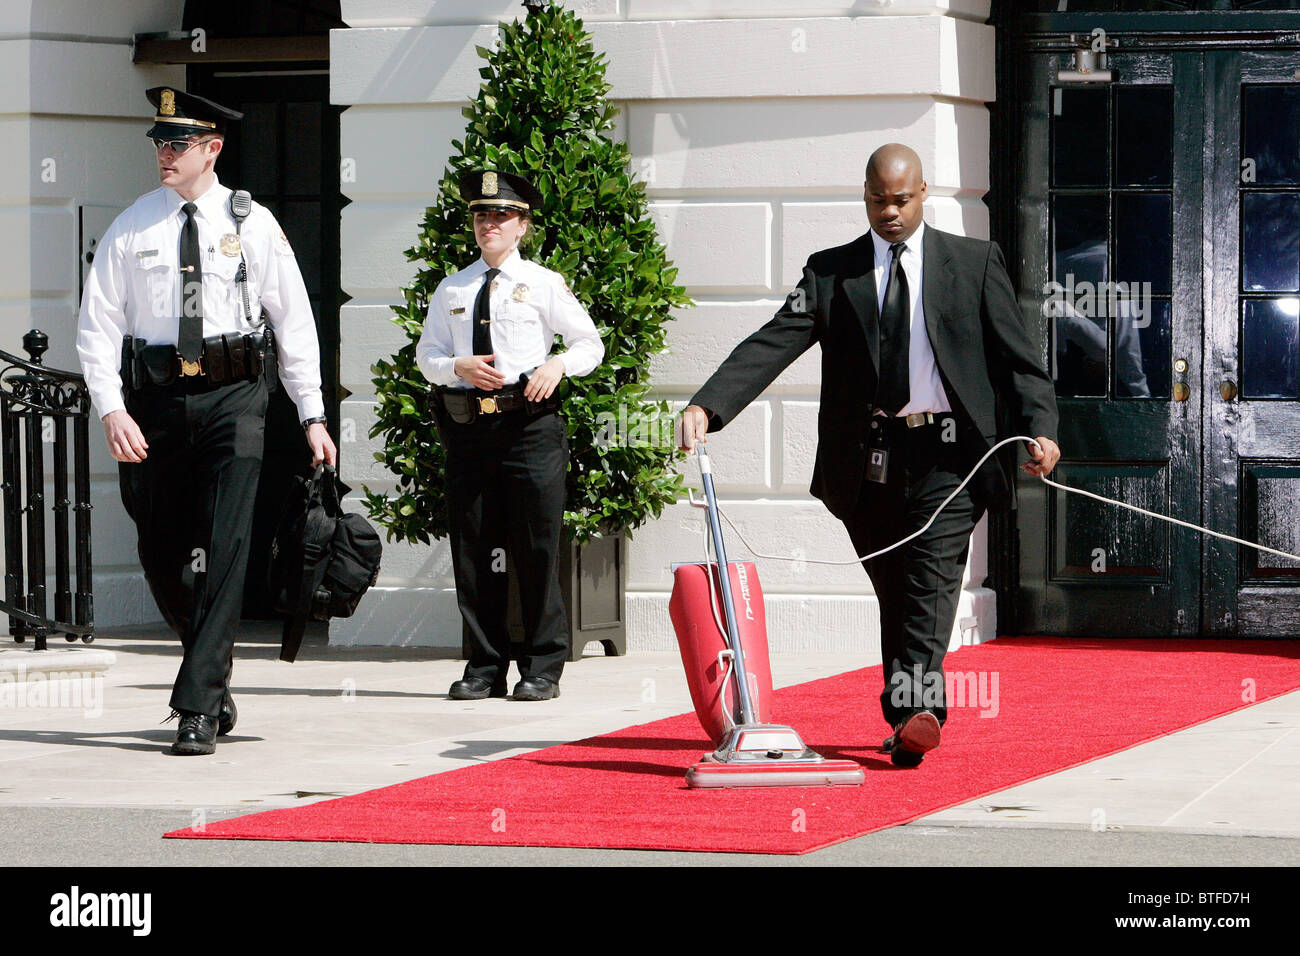 Preparations at the White House for red carpet VIP guest, Washington DC, USA Stock Photo